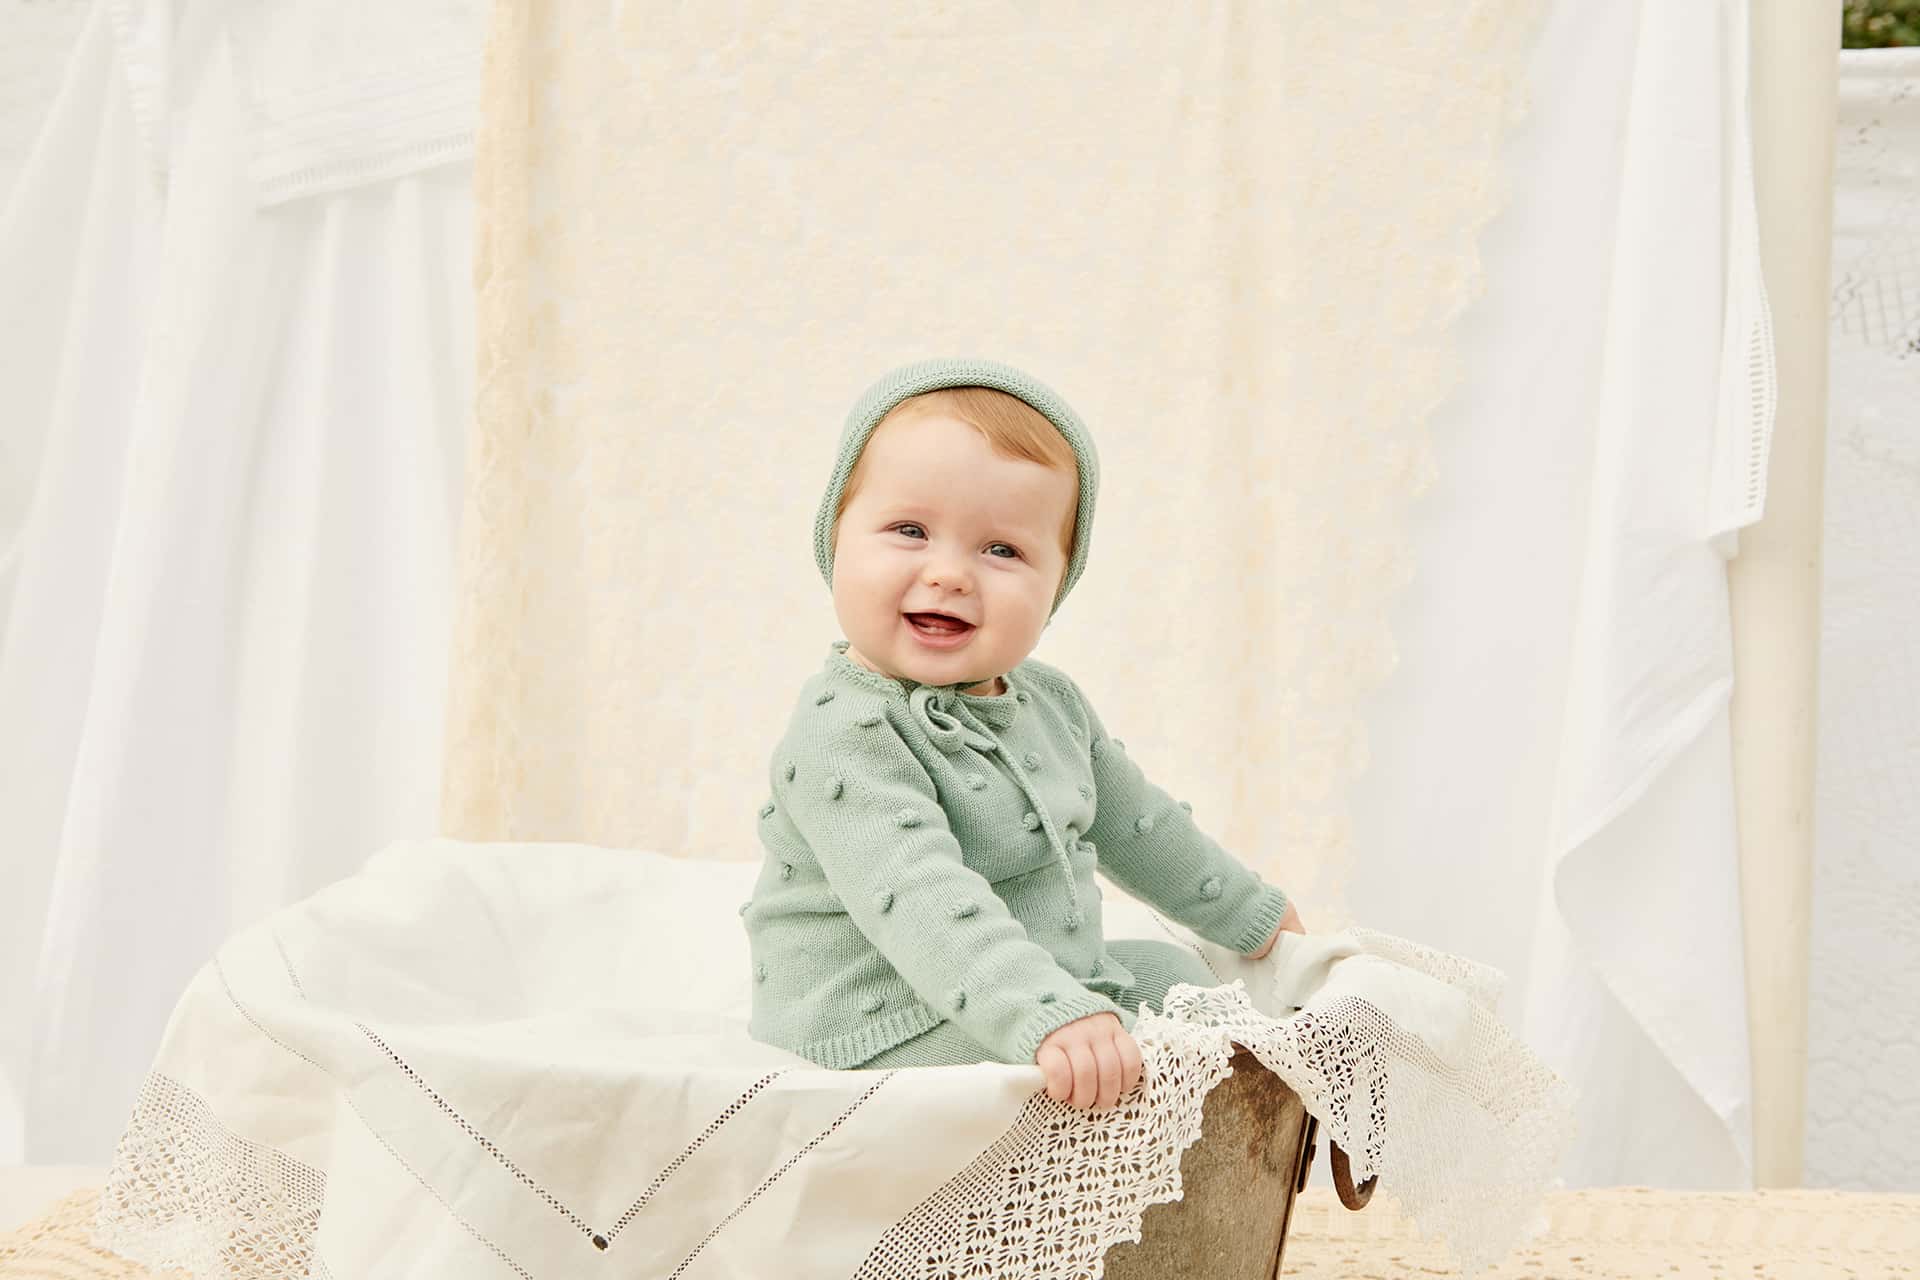 The childrenswear and baby boutiques in